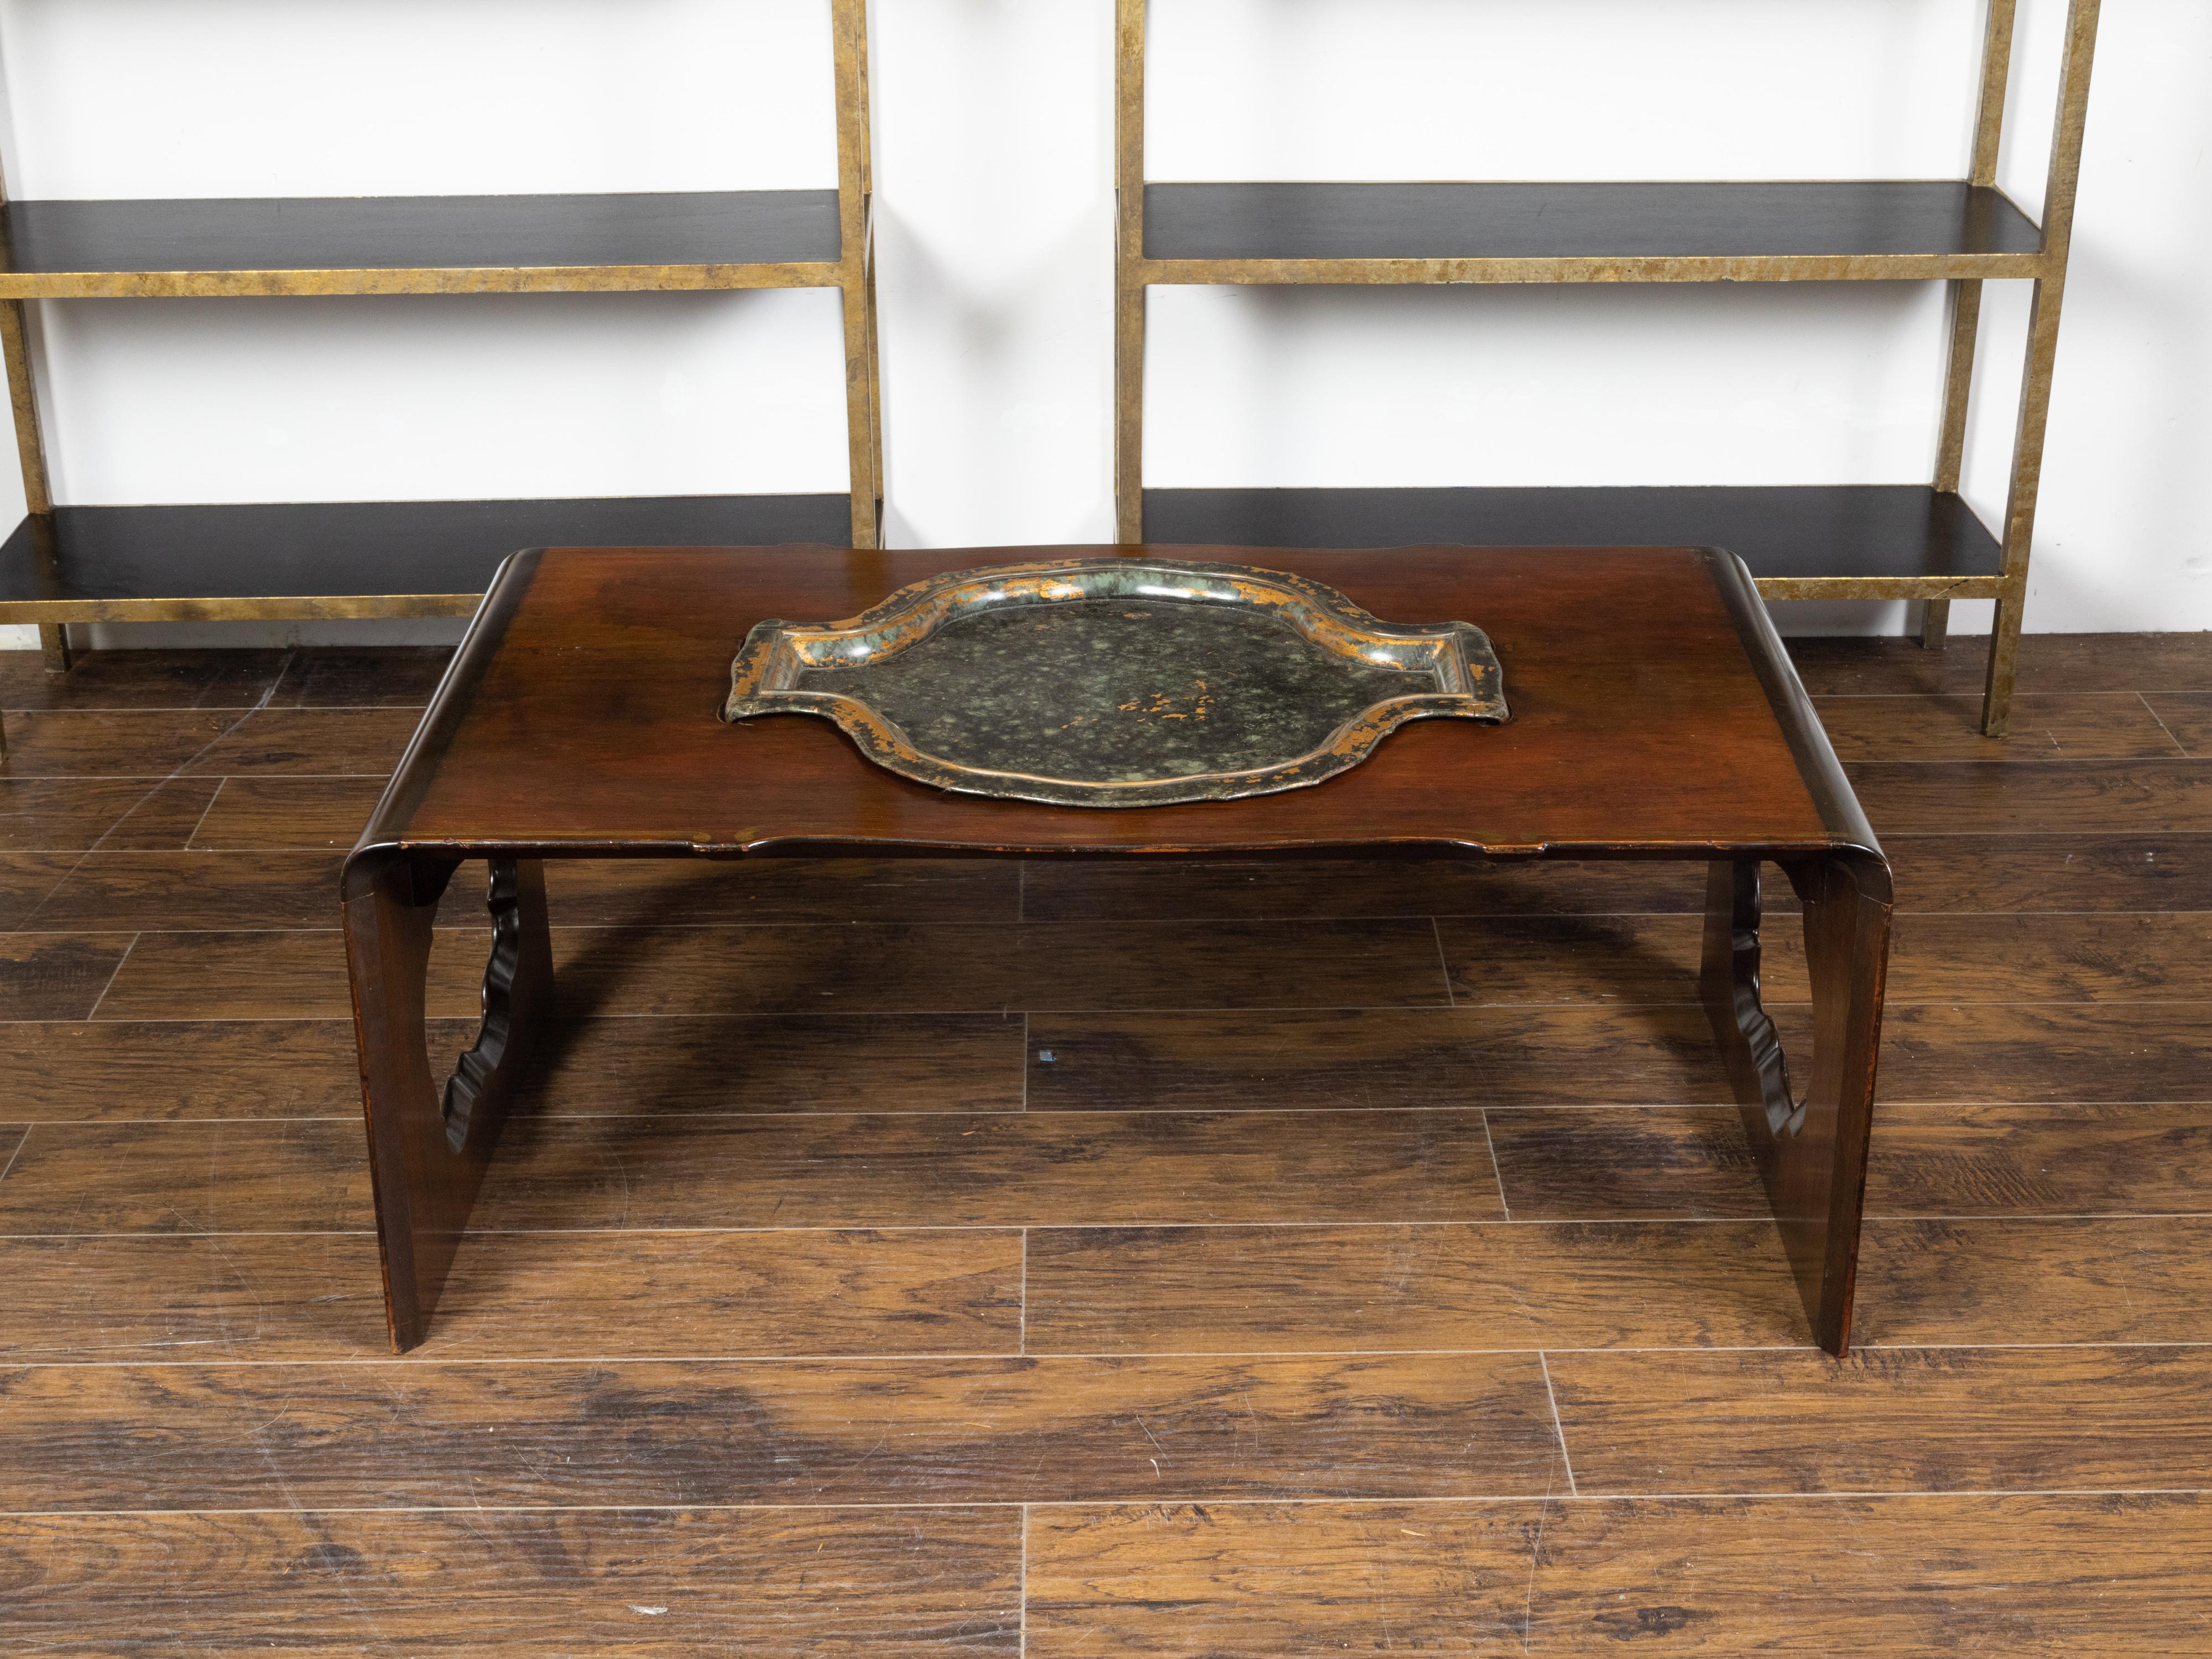 A vintage Asian rosewood waterfall coffee table from the mid 20th century, with removable tray and pierced sides. Created during the midcentury period, this rosewood coffee table features a rectangular top with removable tray in its center, falling